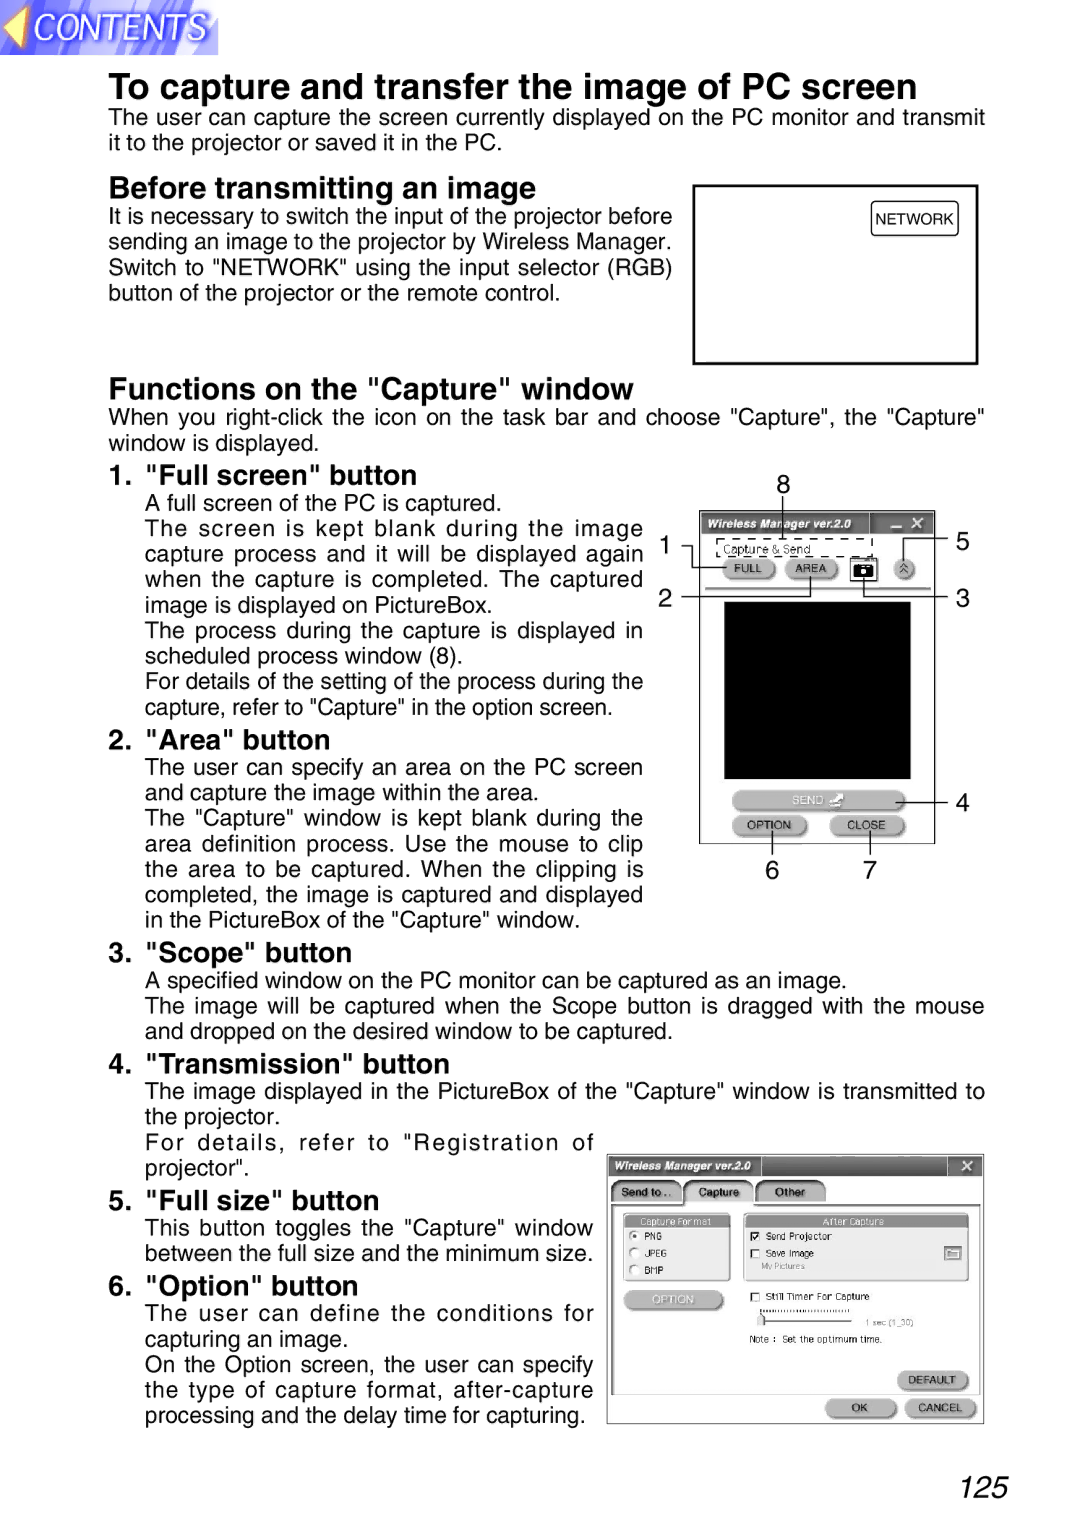 Panasonic PT-L750U R, TQBH9003-6 manual To capture and transfer the image of PC screen, Before transmitting an image 